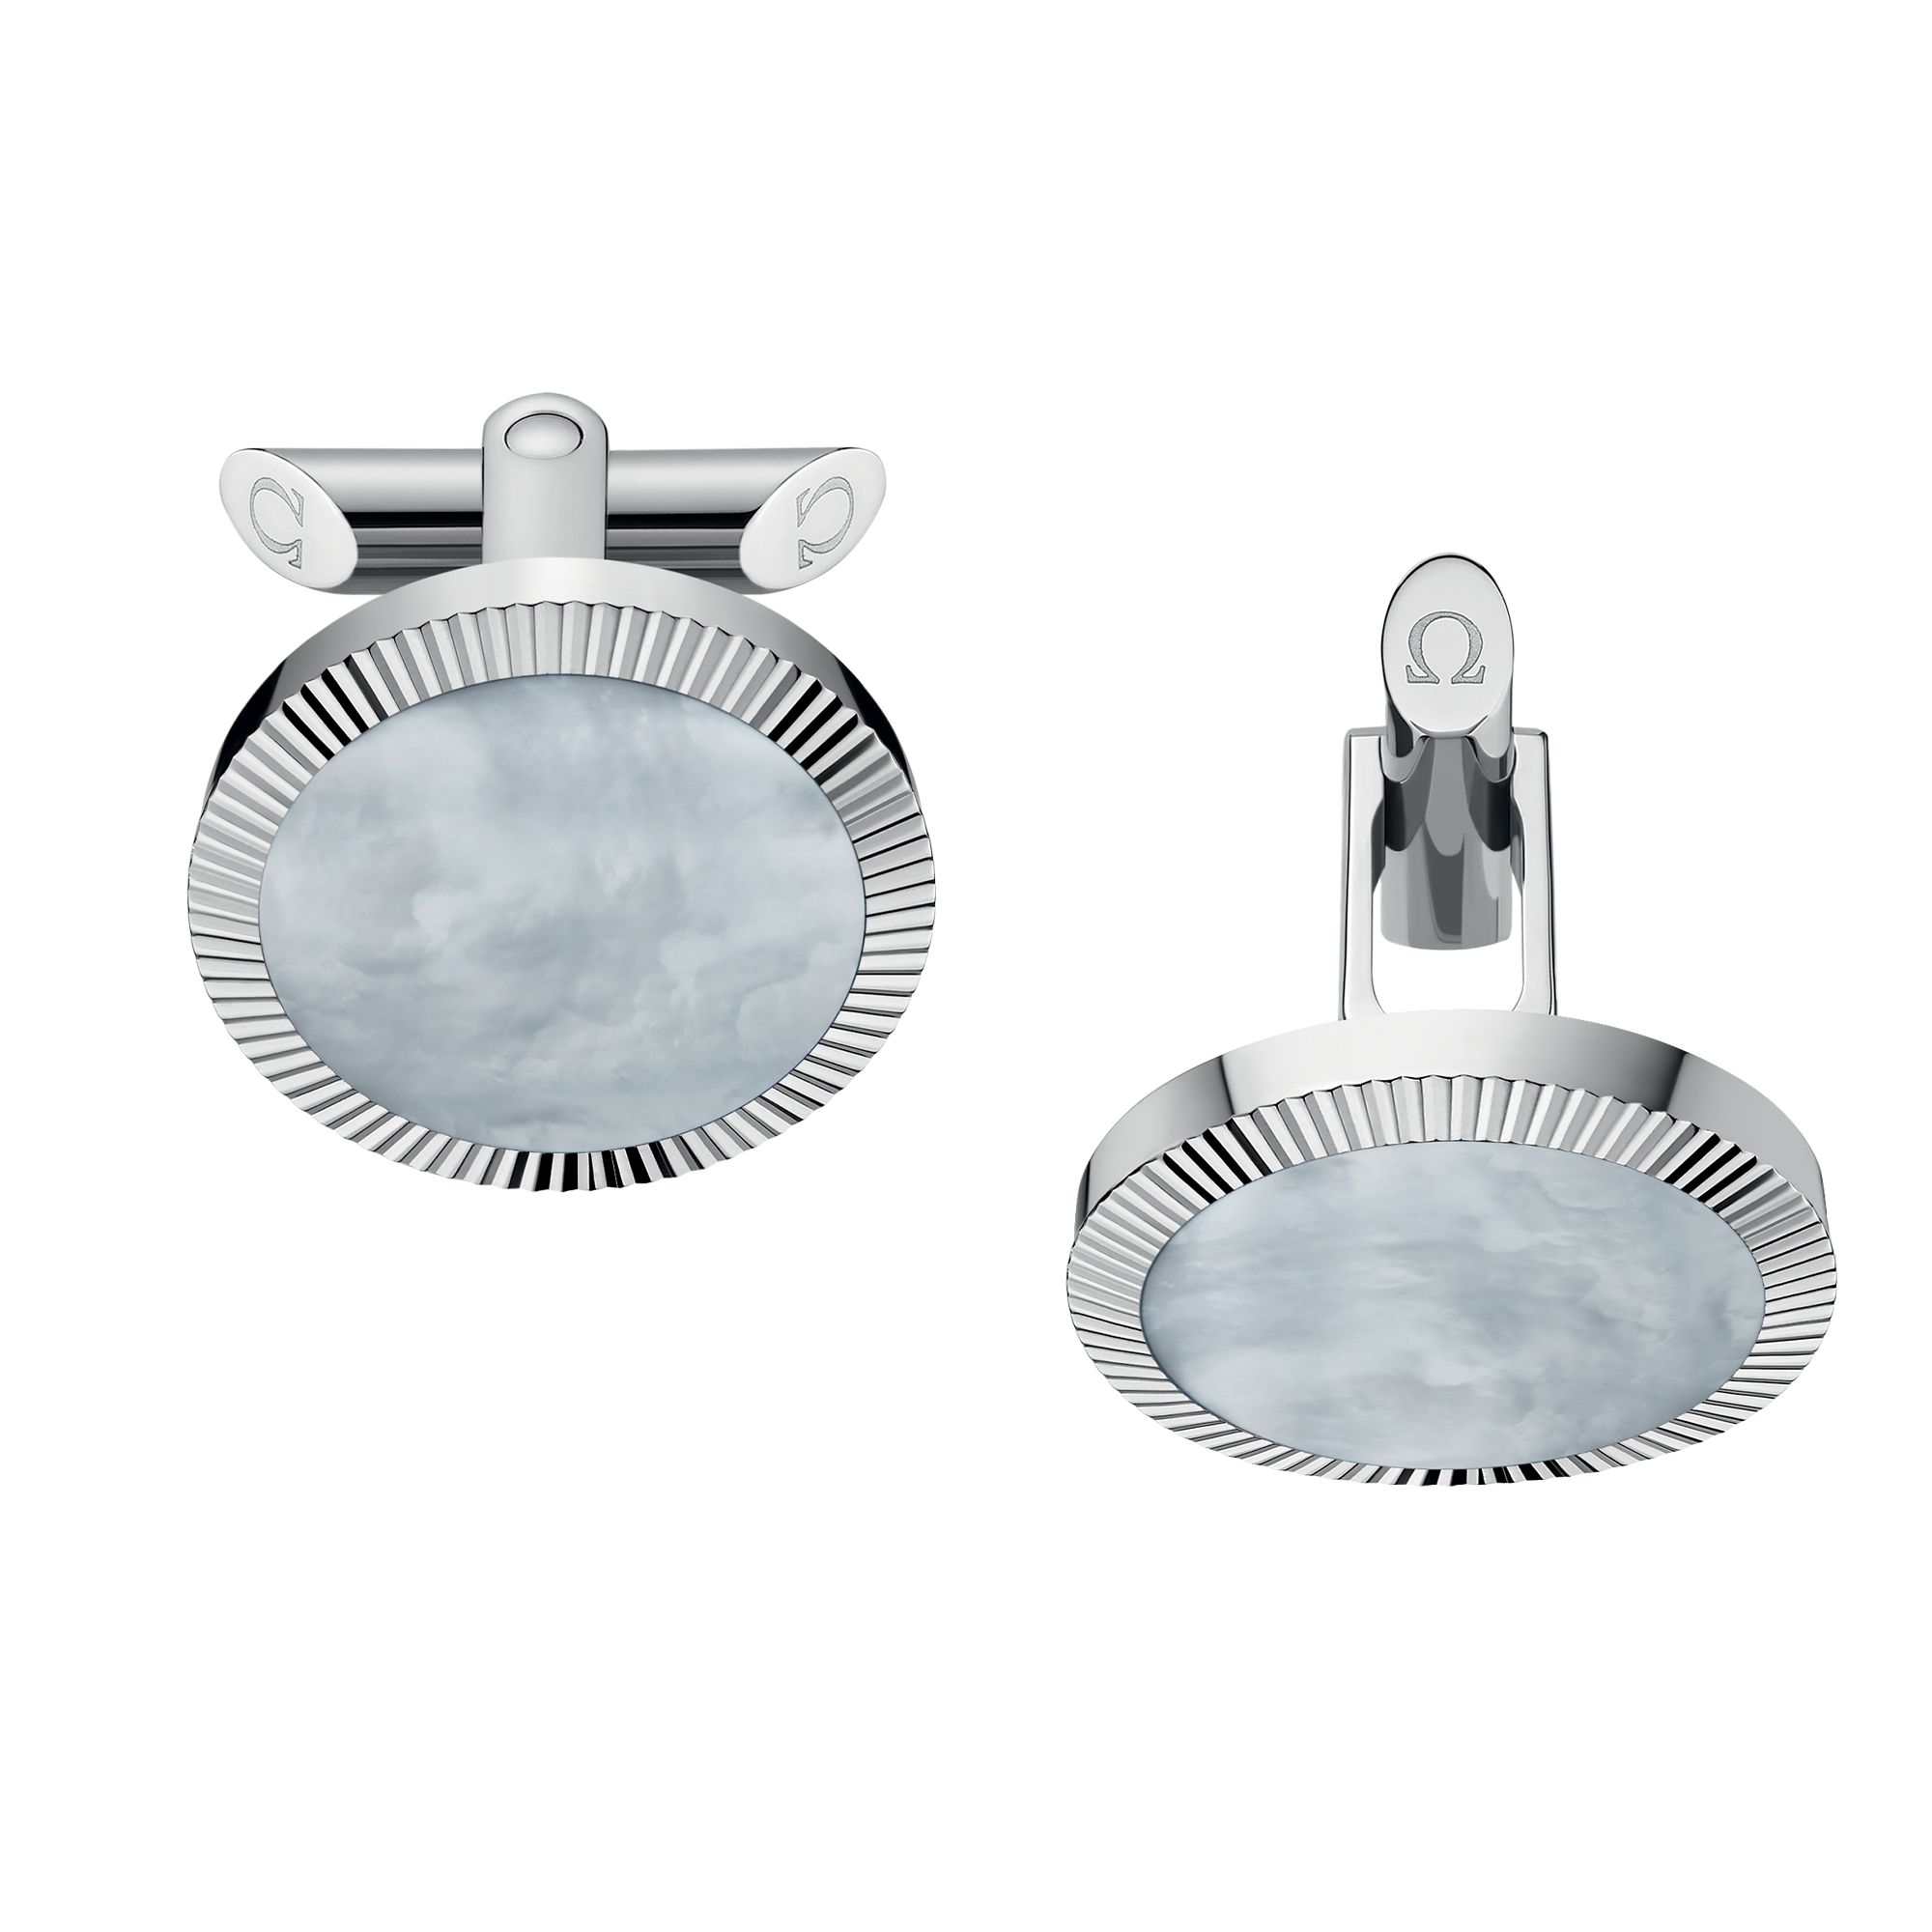 Constellation Cufflinks, Mother-of-Pearl plate, Stainless steel - CA01ST0700305